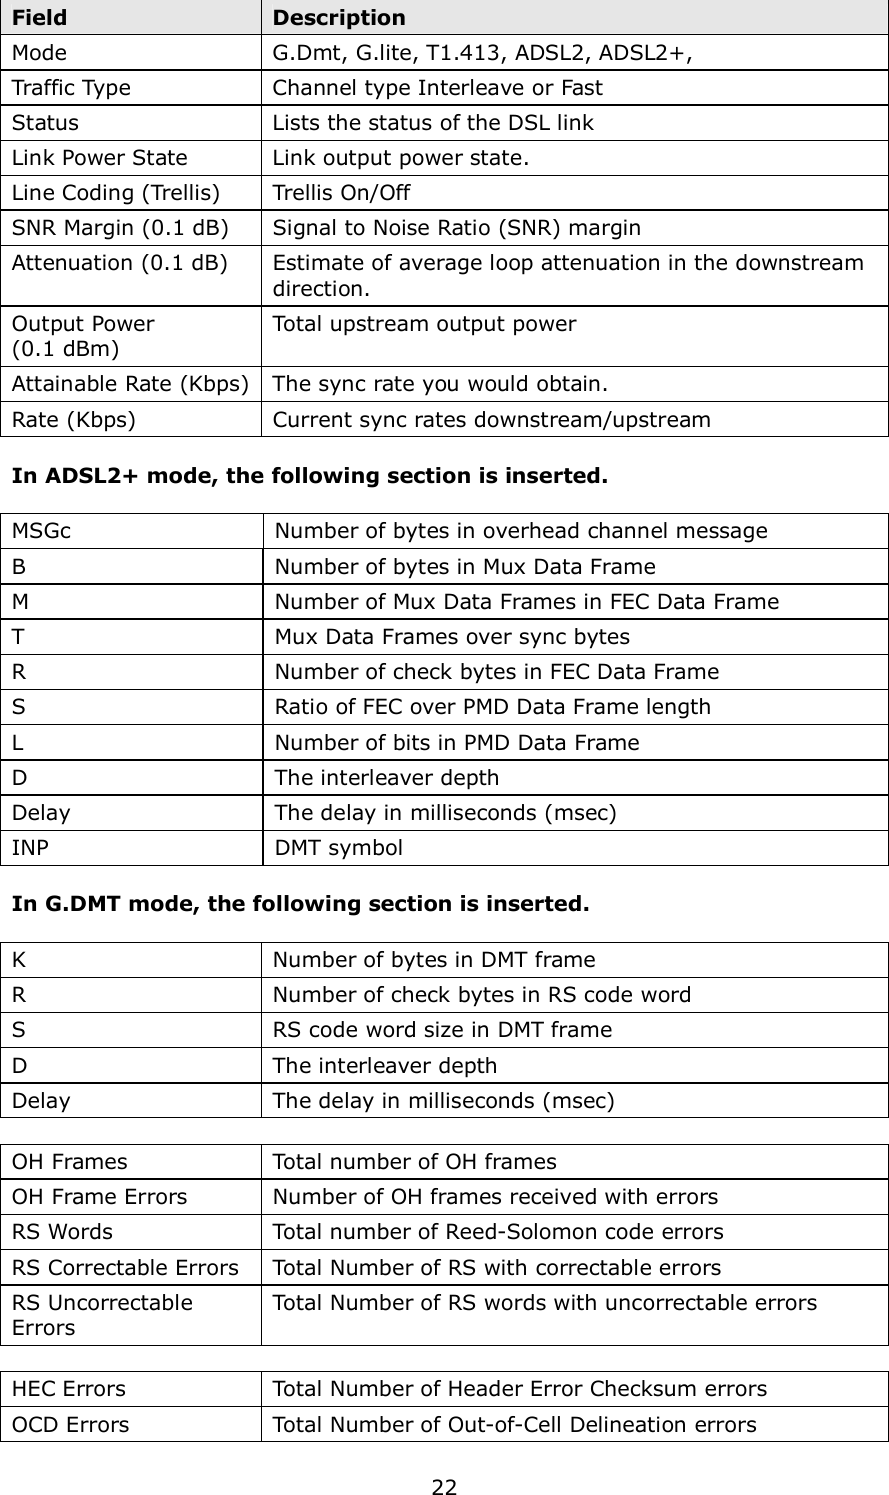  22 Field  Description Mode  G.Dmt, G.lite, T1.413, ADSL2, ADSL2+, Traffic Type  Channel type Interleave or Fast Status  Lists the status of the DSL link Link Power State  Link output power state. Line Coding (Trellis)  Trellis On/Off SNR Margin (0.1 dB)  Signal to Noise Ratio (SNR) margin Attenuation (0.1 dB)  Estimate of average loop attenuation in the downstream direction. Output Power   (0.1 dBm) Total upstream output power Attainable Rate (Kbps) The sync rate you would obtain. Rate (Kbps)  Current sync rates downstream/upstream    In ADSL2+ mode, the following section is inserted.  MSGc  Number of bytes in overhead channel message B  Number of bytes in Mux Data Frame M  Number of Mux Data Frames in FEC Data Frame T    Mux Data Frames over sync bytes R    Number of check bytes in FEC Data Frame S    Ratio of FEC over PMD Data Frame length L    Number of bits in PMD Data Frame D    The interleaver depth Delay    The delay in milliseconds (msec) INP  DMT symbol  In G.DMT mode, the following section is inserted.  K  Number of bytes in DMT frame R  Number of check bytes in RS code word S  RS code word size in DMT frame D  The interleaver depth Delay  The delay in milliseconds (msec)  OH Frames  Total number of OH frames OH Frame Errors  Number of OH frames received with errors RS Words  Total number of Reed-Solomon code errors RS Correctable Errors  Total Number of RS with correctable errors RS Uncorrectable Errors   Total Number of RS words with uncorrectable errors  HEC Errors  Total Number of Header Error Checksum errors OCD Errors  Total Number of Out-of-Cell Delineation errors 